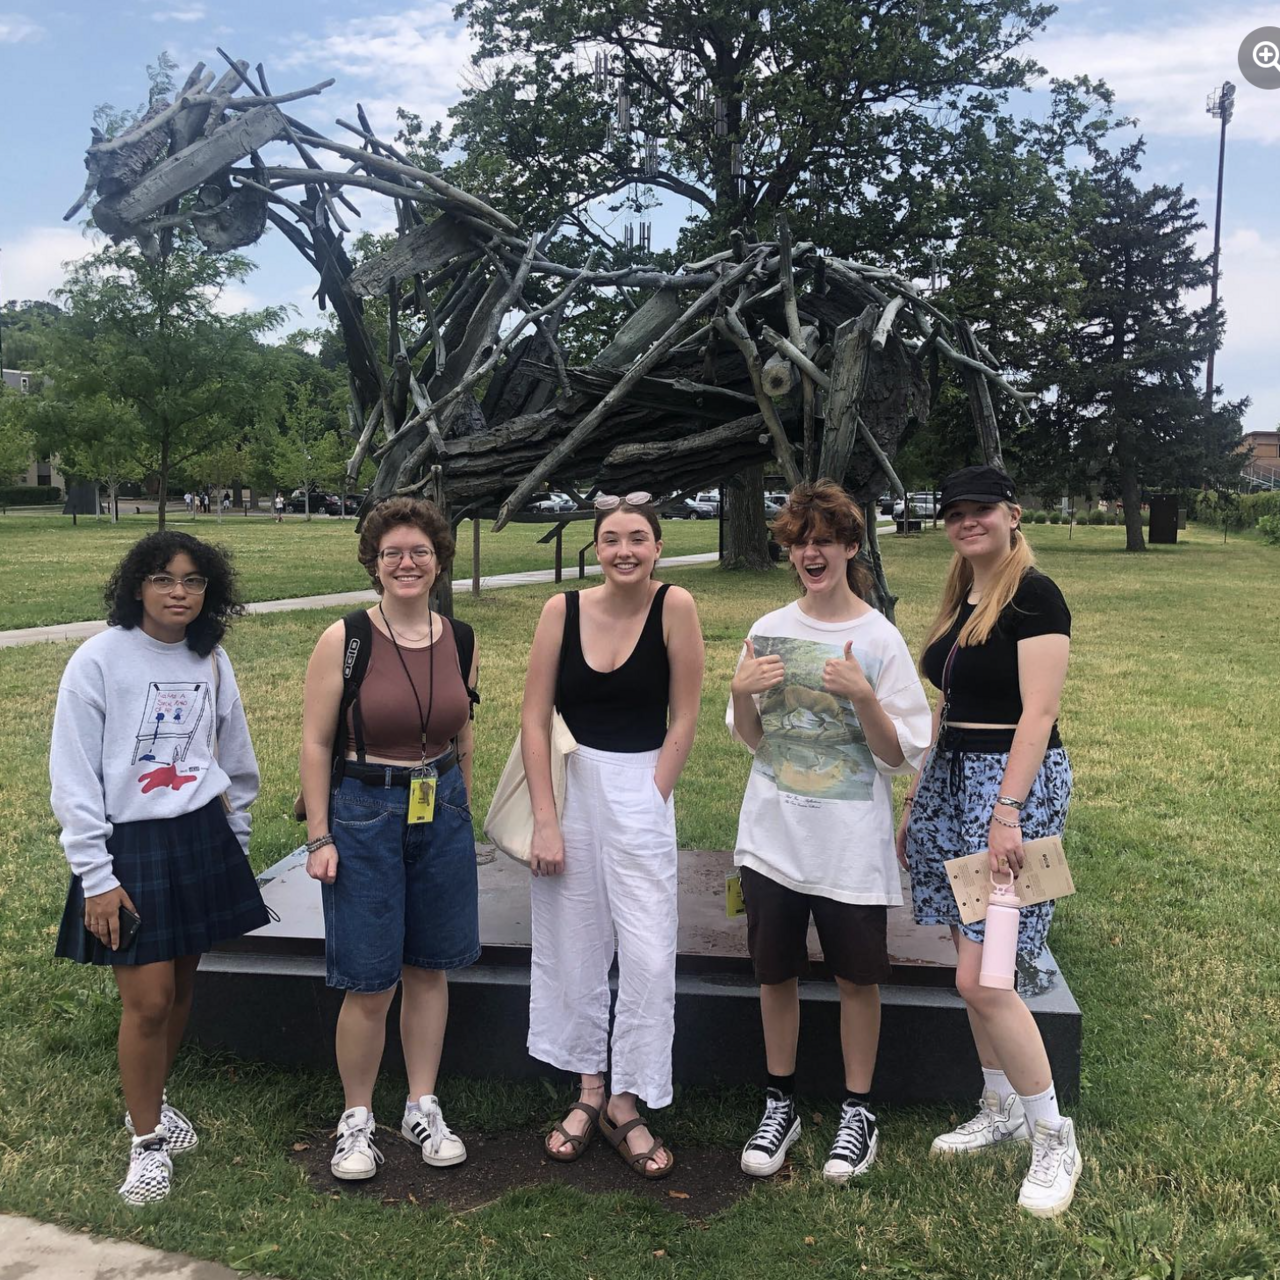 Five PCSS students stand in front of a wooden horse sculpture outside